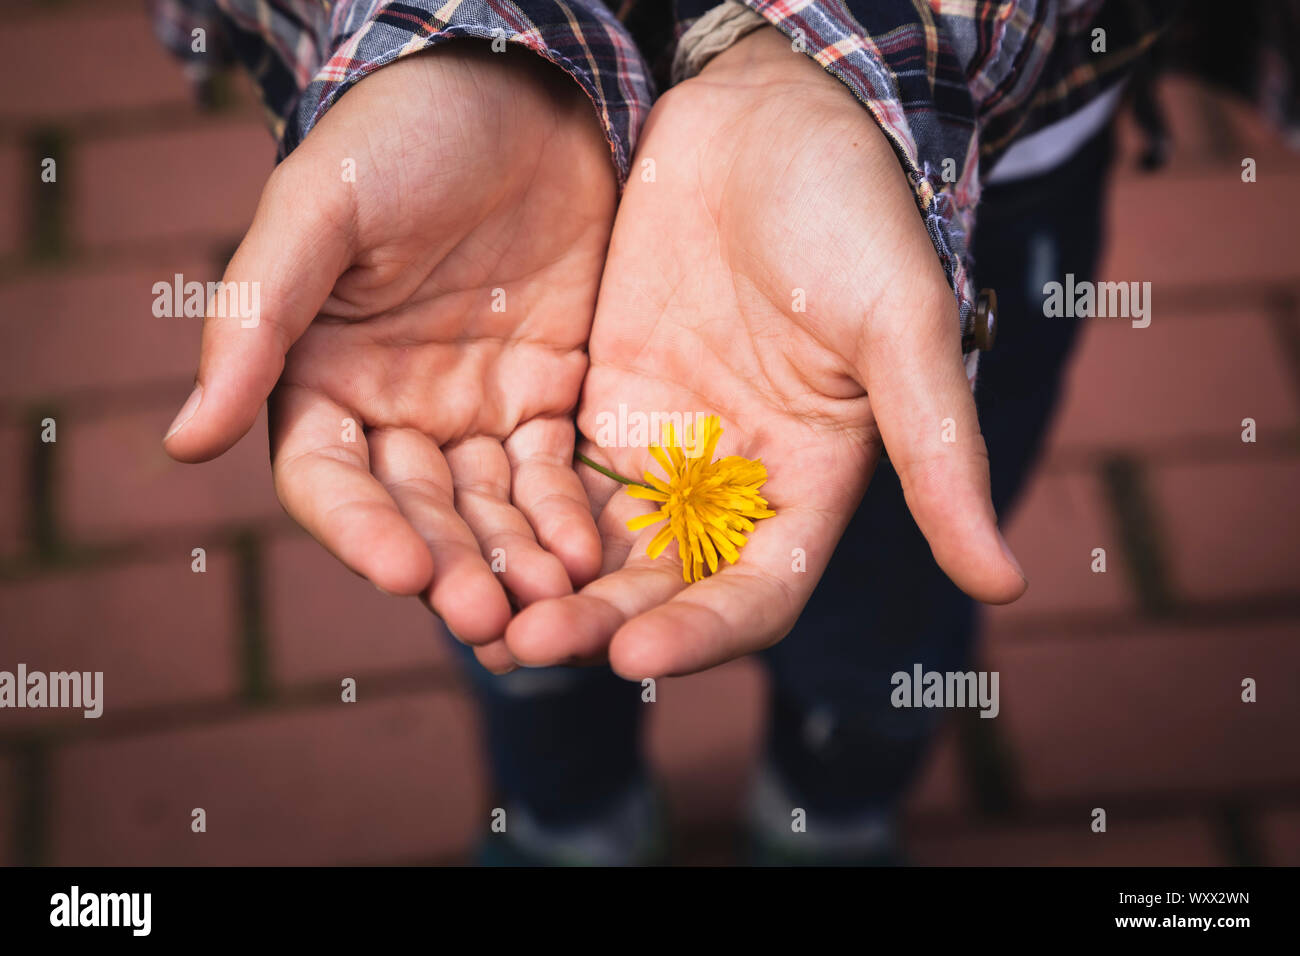 Closeup of young girls hands holding a simple, yellow flower; concept: caring and protecting environment and nature Stock Photo